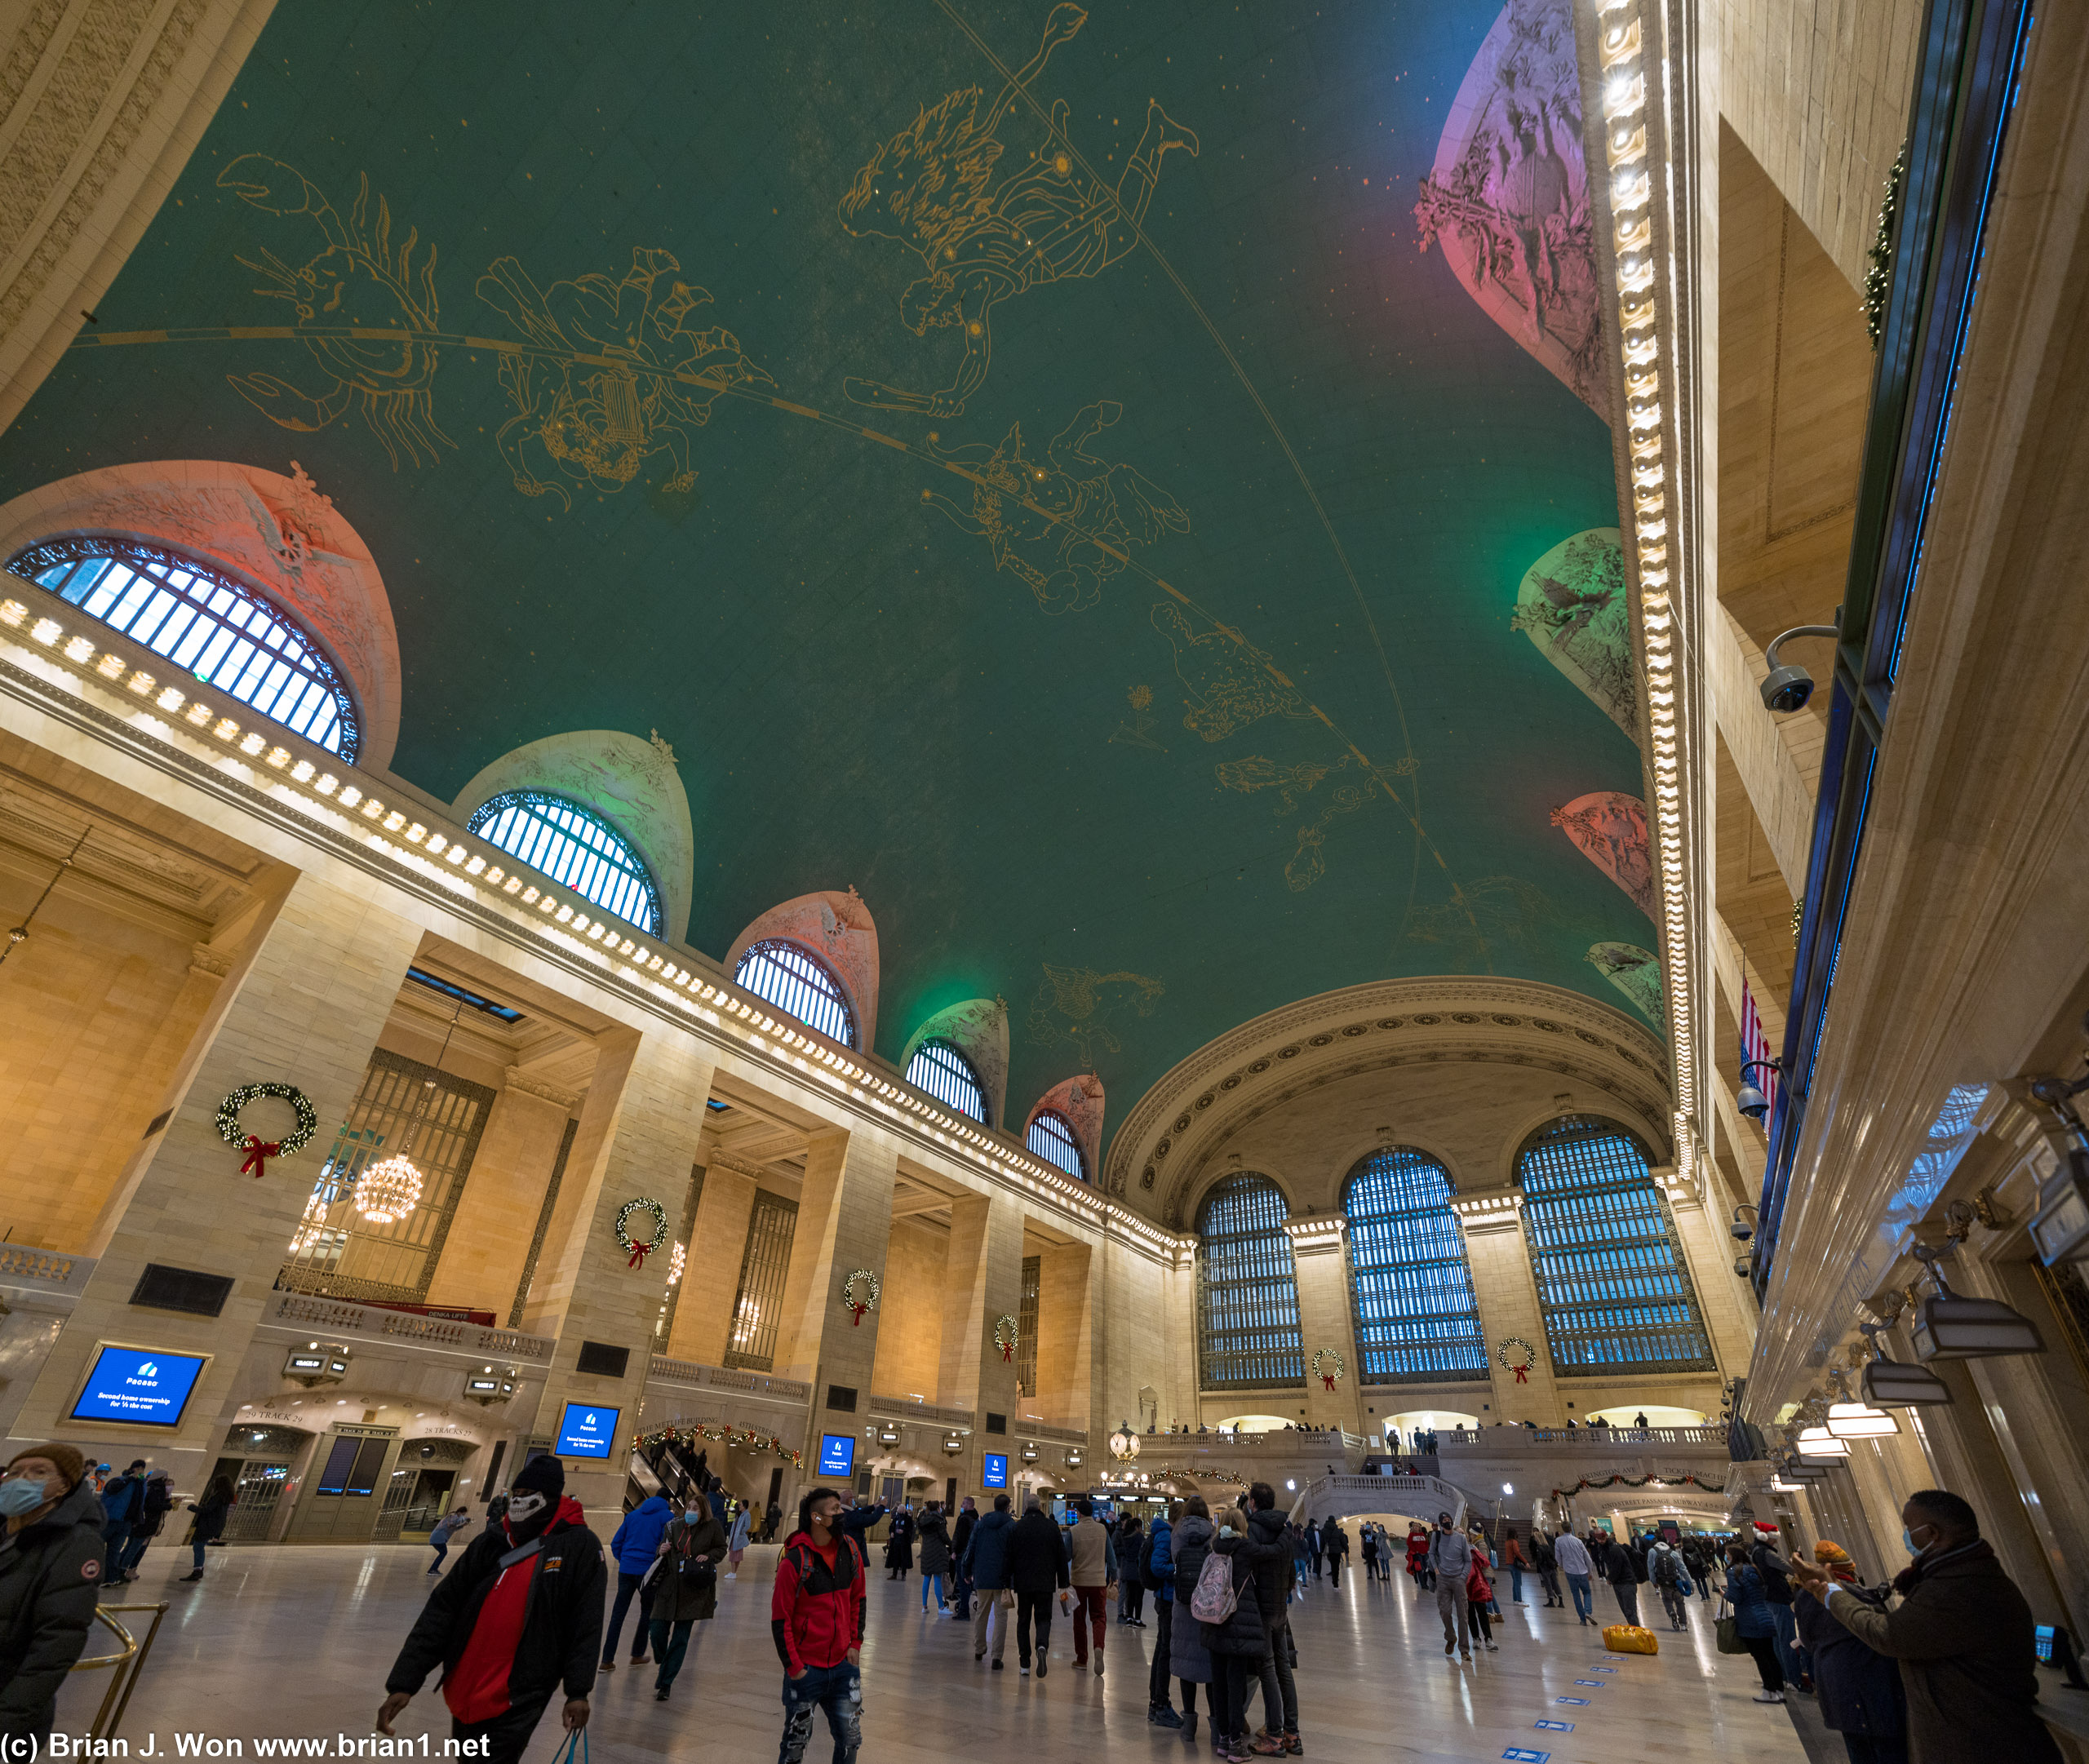 Grand Central. The story of the inverted sky.